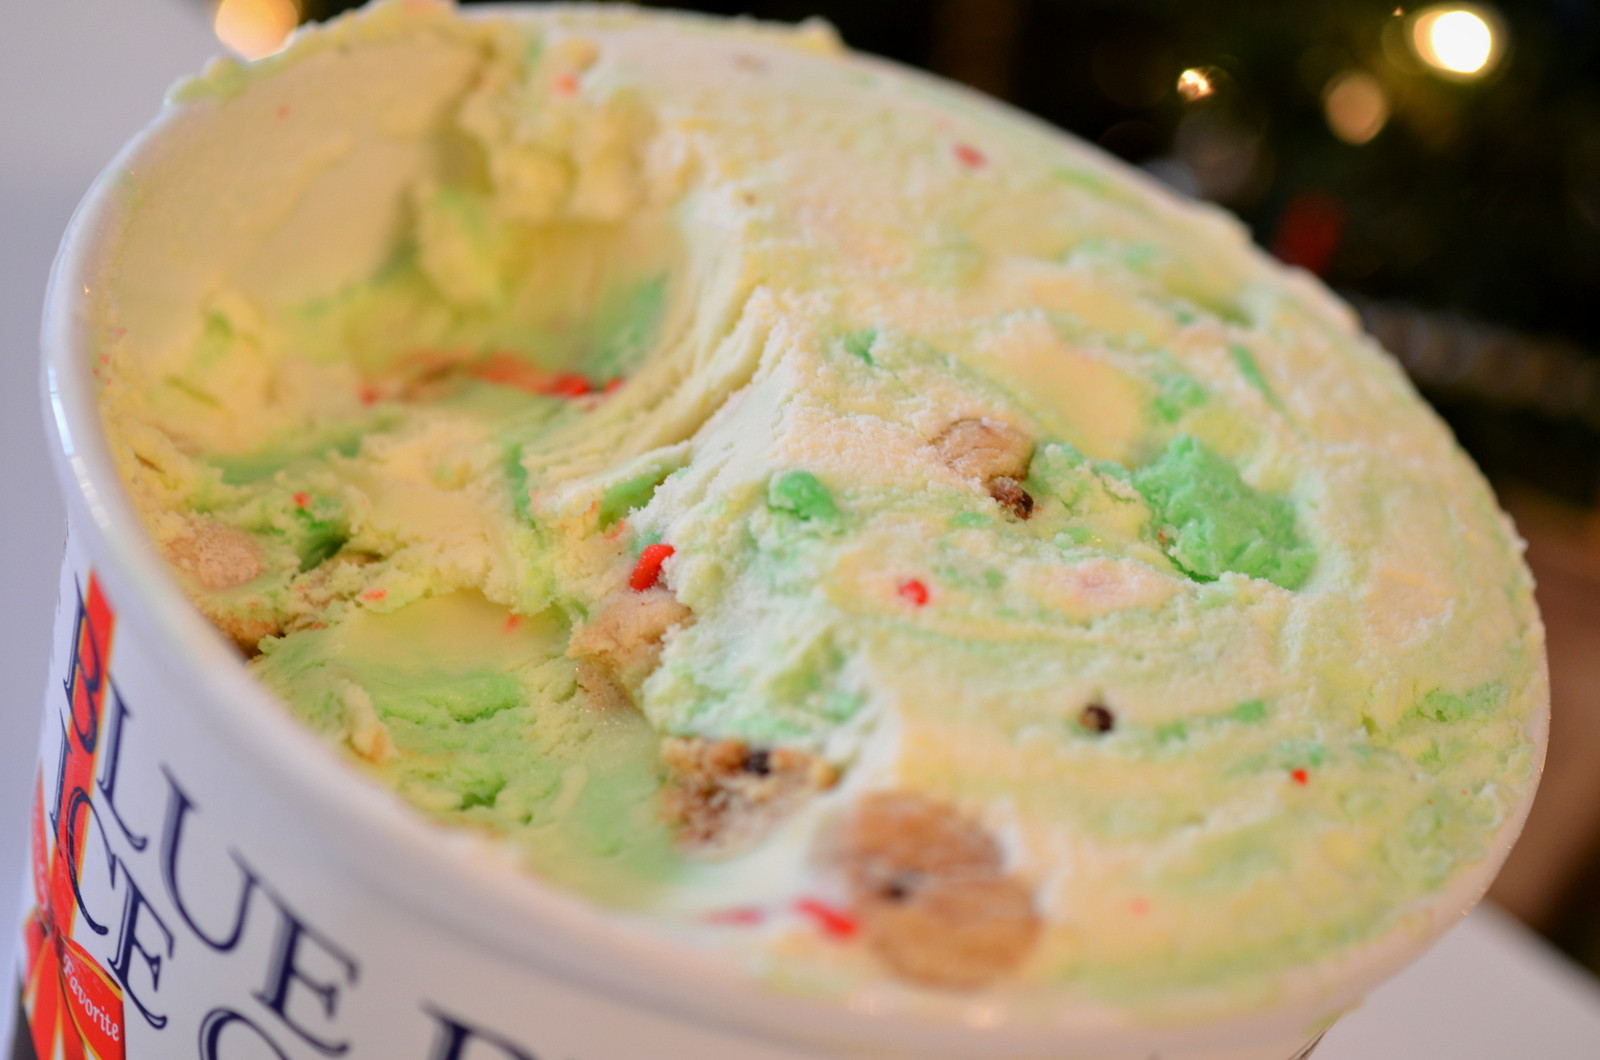 Christmas Cookies Blue Bell
 The Ice Cream Informant REVIEW Blue Bell Christmas Cookies